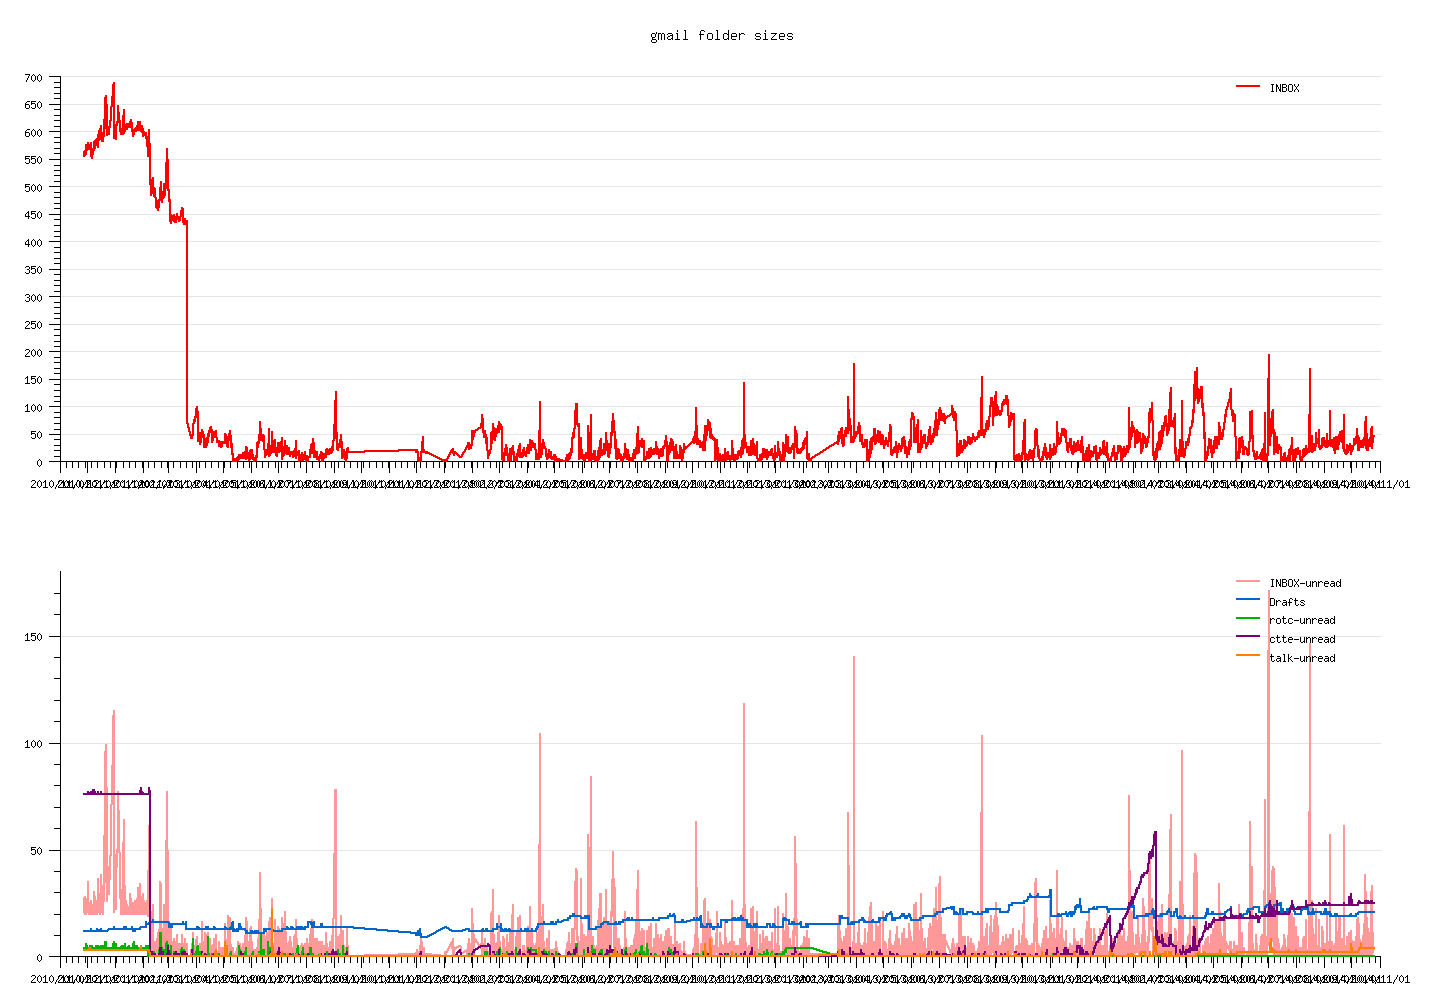 sample graph of gmail inbox size over time